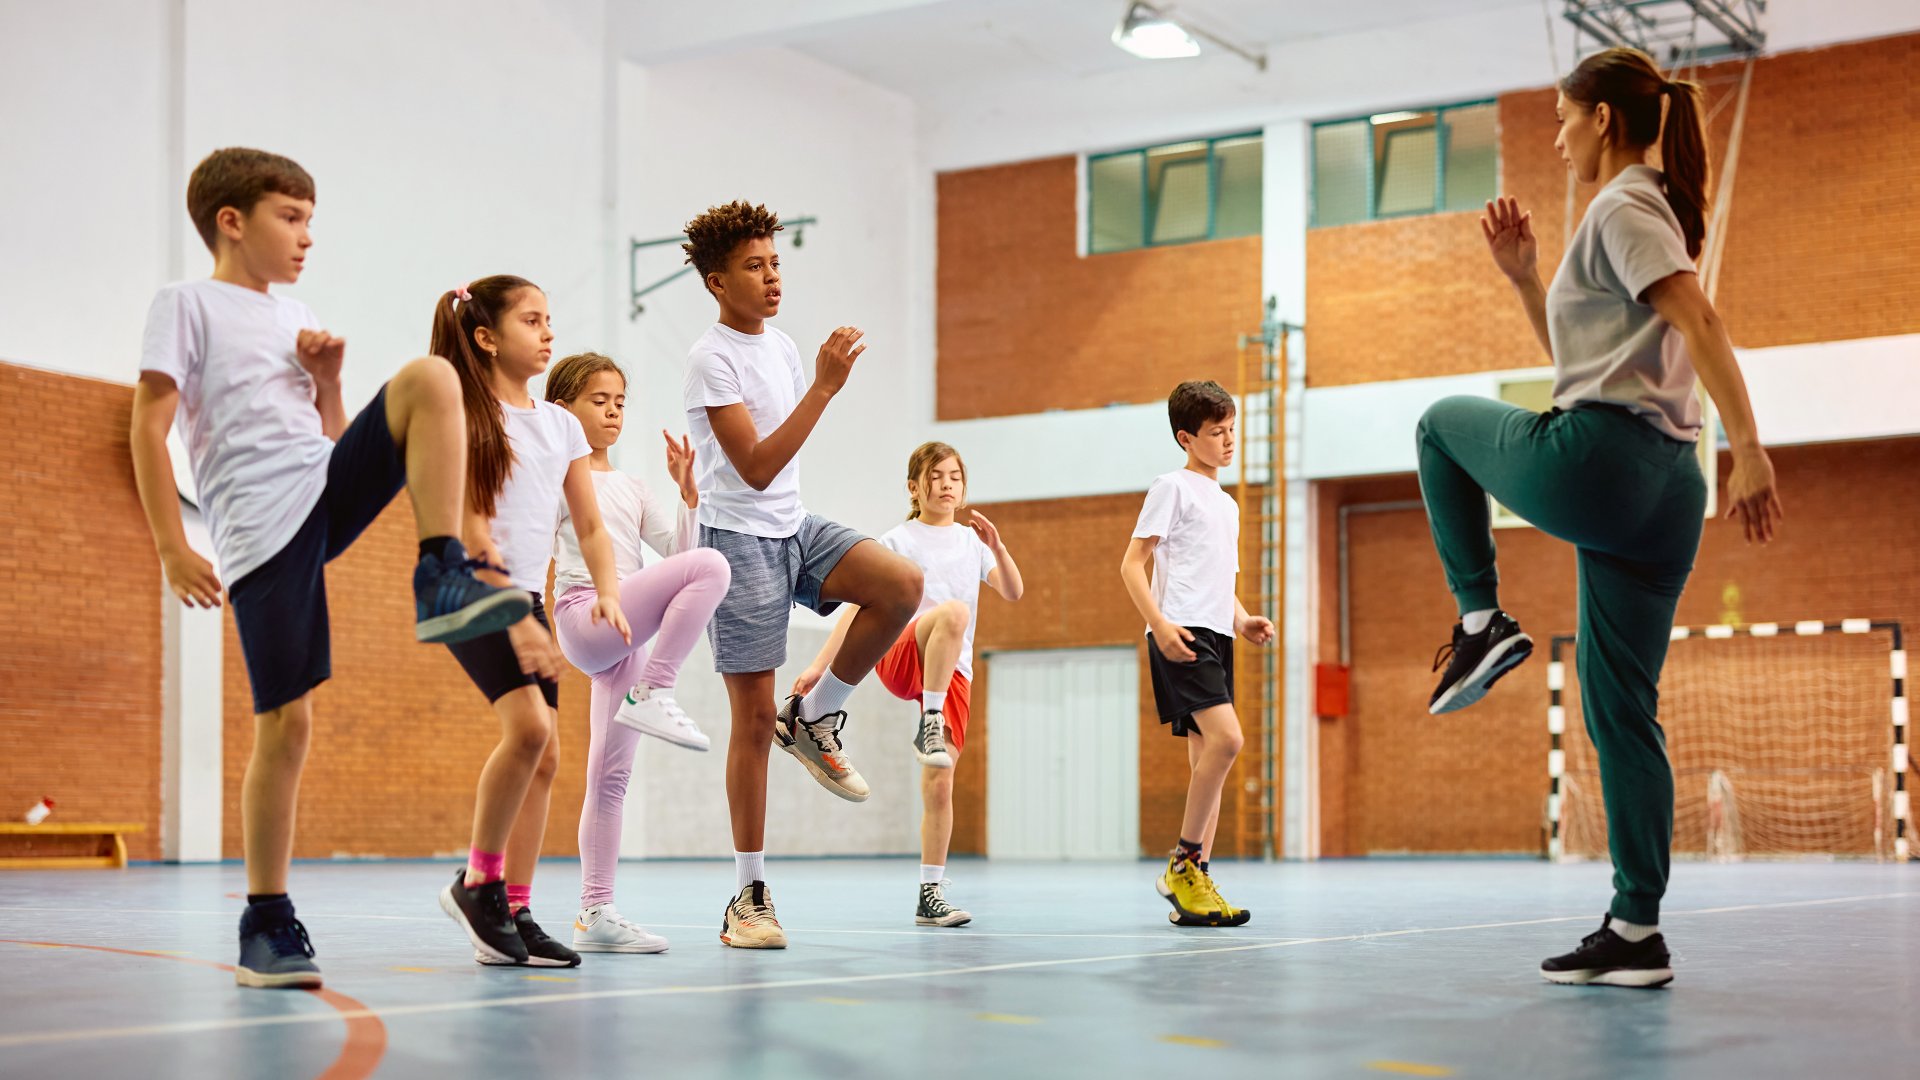 Mandated high school phys-ed policy does not affect overall physical  activity levels in youth